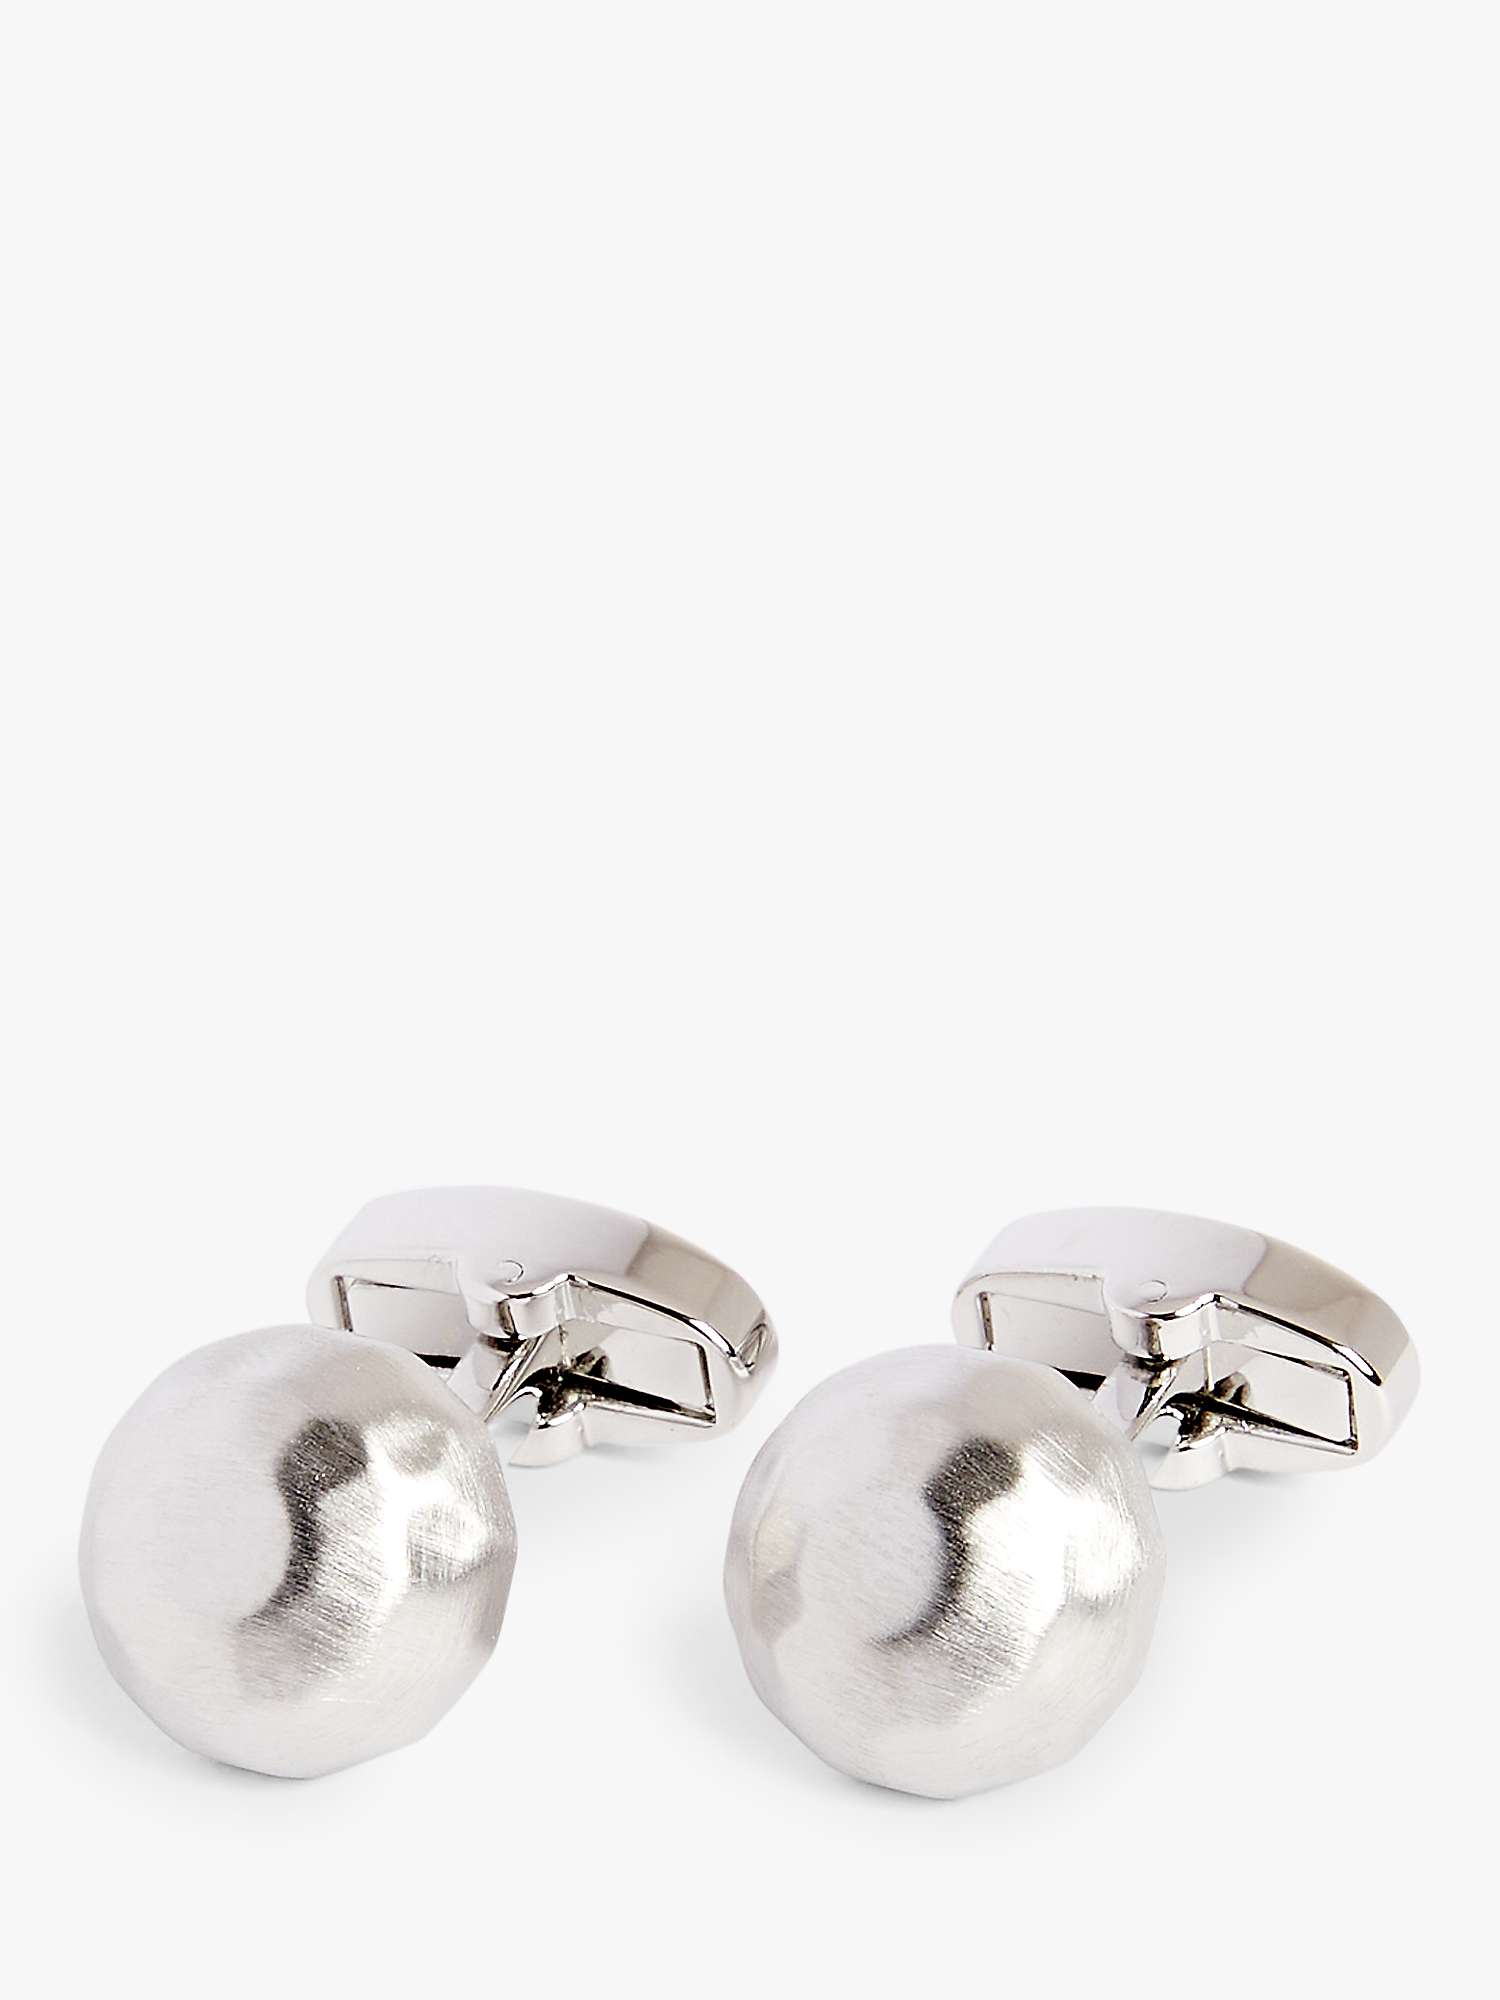 Buy Moss Brushed Dome Cufflinks, Silver Online at johnlewis.com